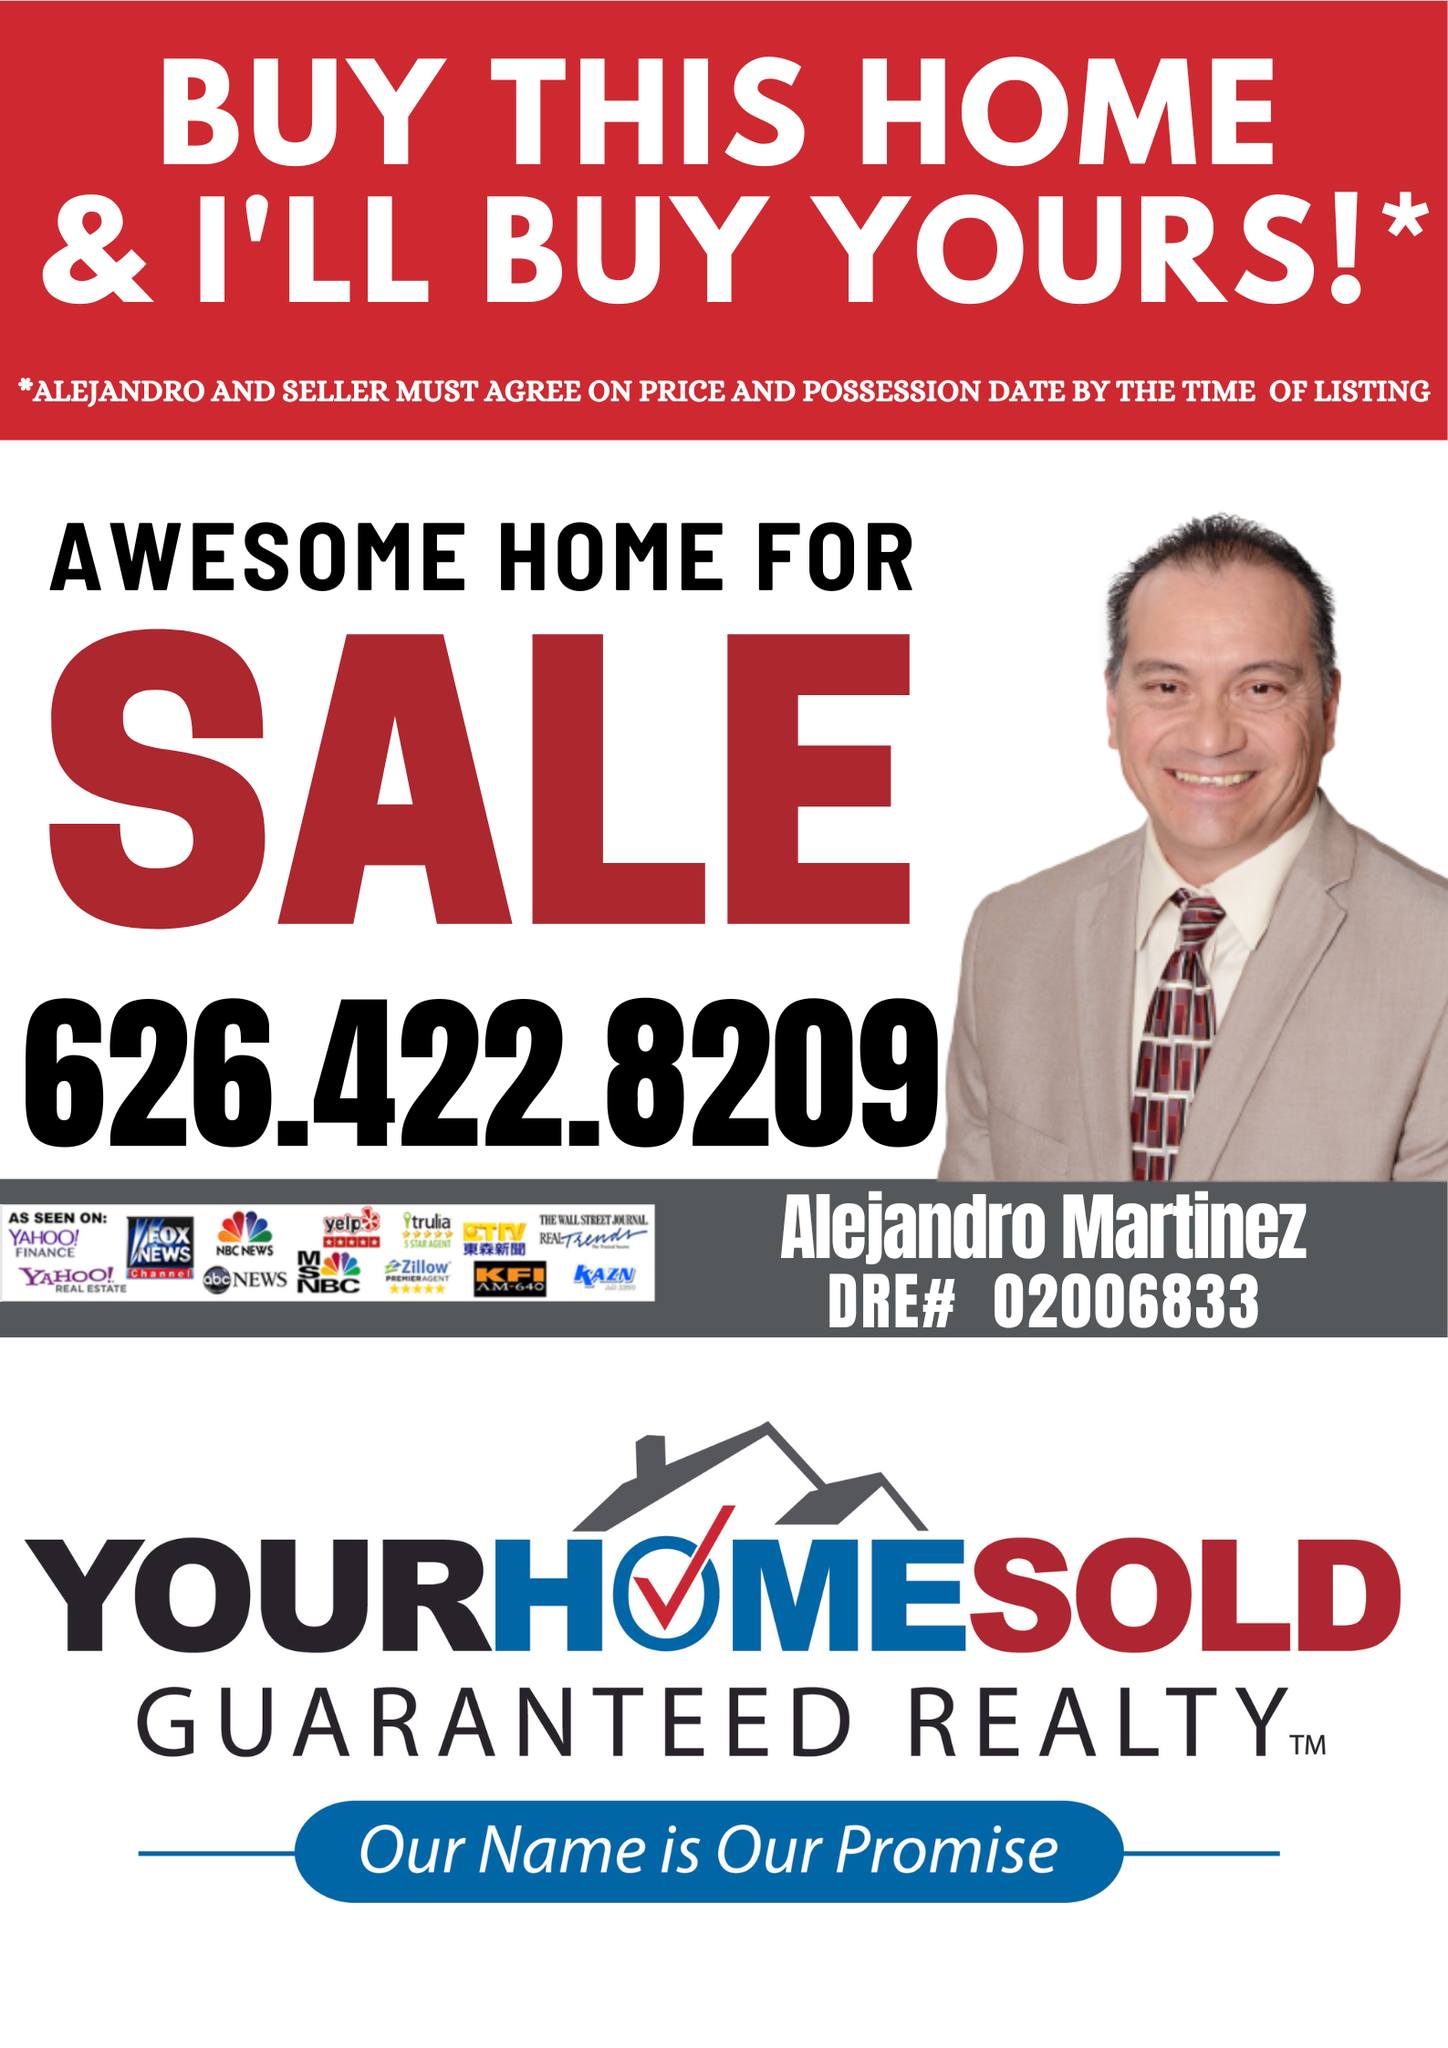 Real-Estate-Agent-Alejandro-Martinez-Turns-his-life-around-after-joining-Your-Home-Sold-Guaranteed-Realty-1.jpg